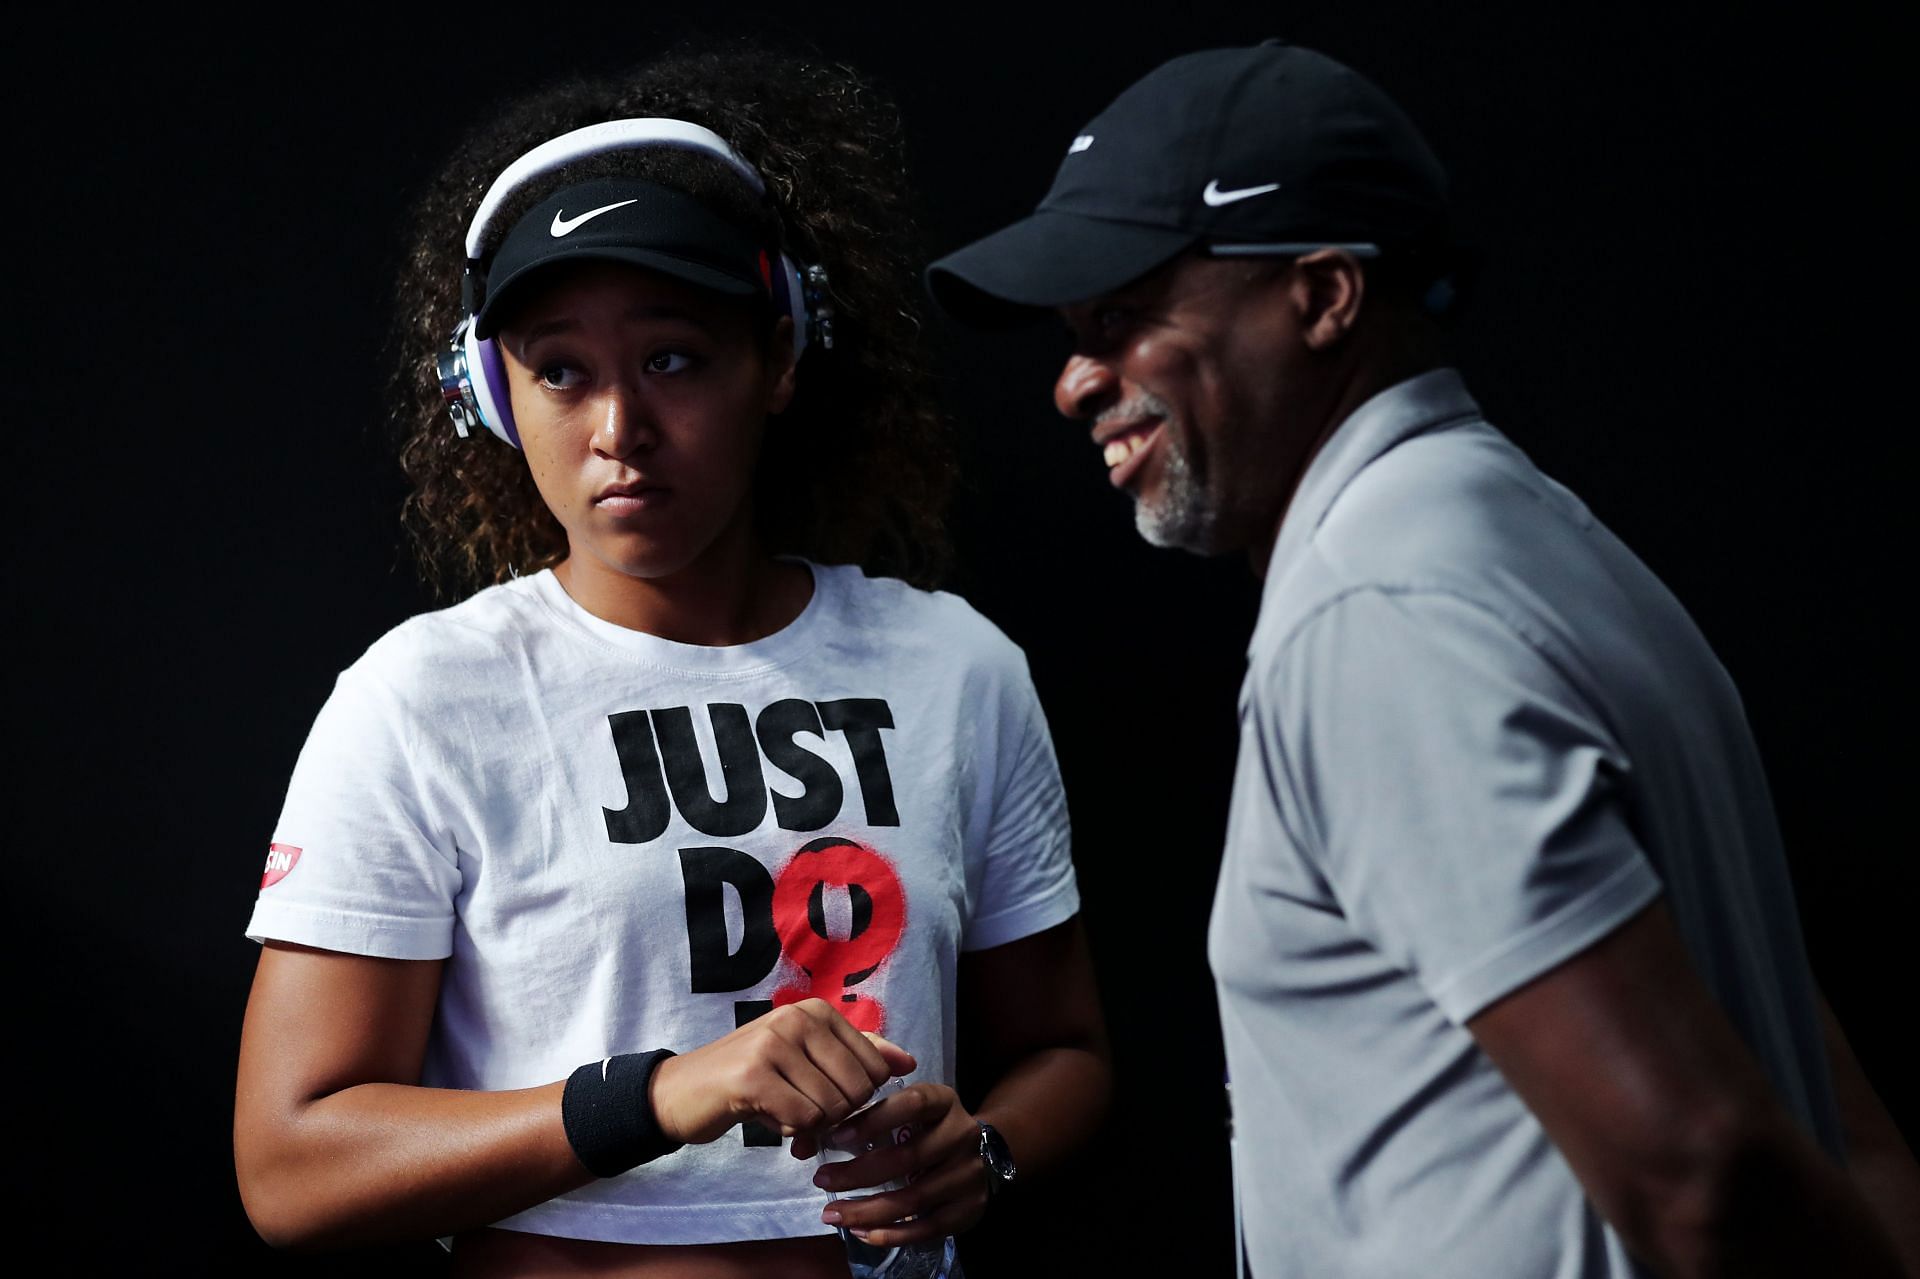 Naomi Osaka now has her dad Leonard Francois back in her coaching team